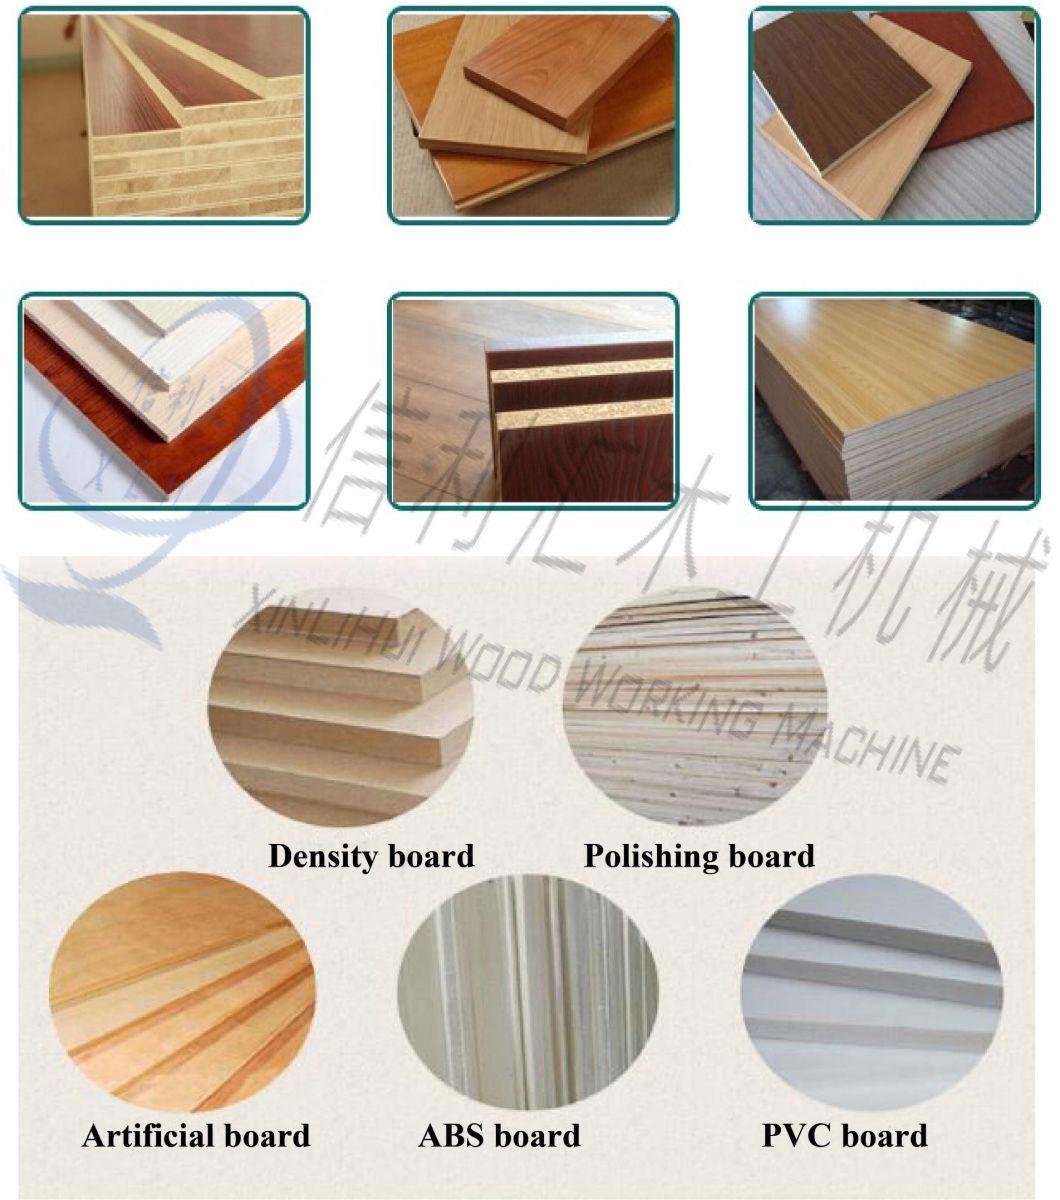 High Quality Panel Overlay Press Panel Processing Woodworking Machine/ High-Profile PVC/ Hot Transfer Face Board Heating Covering Machine